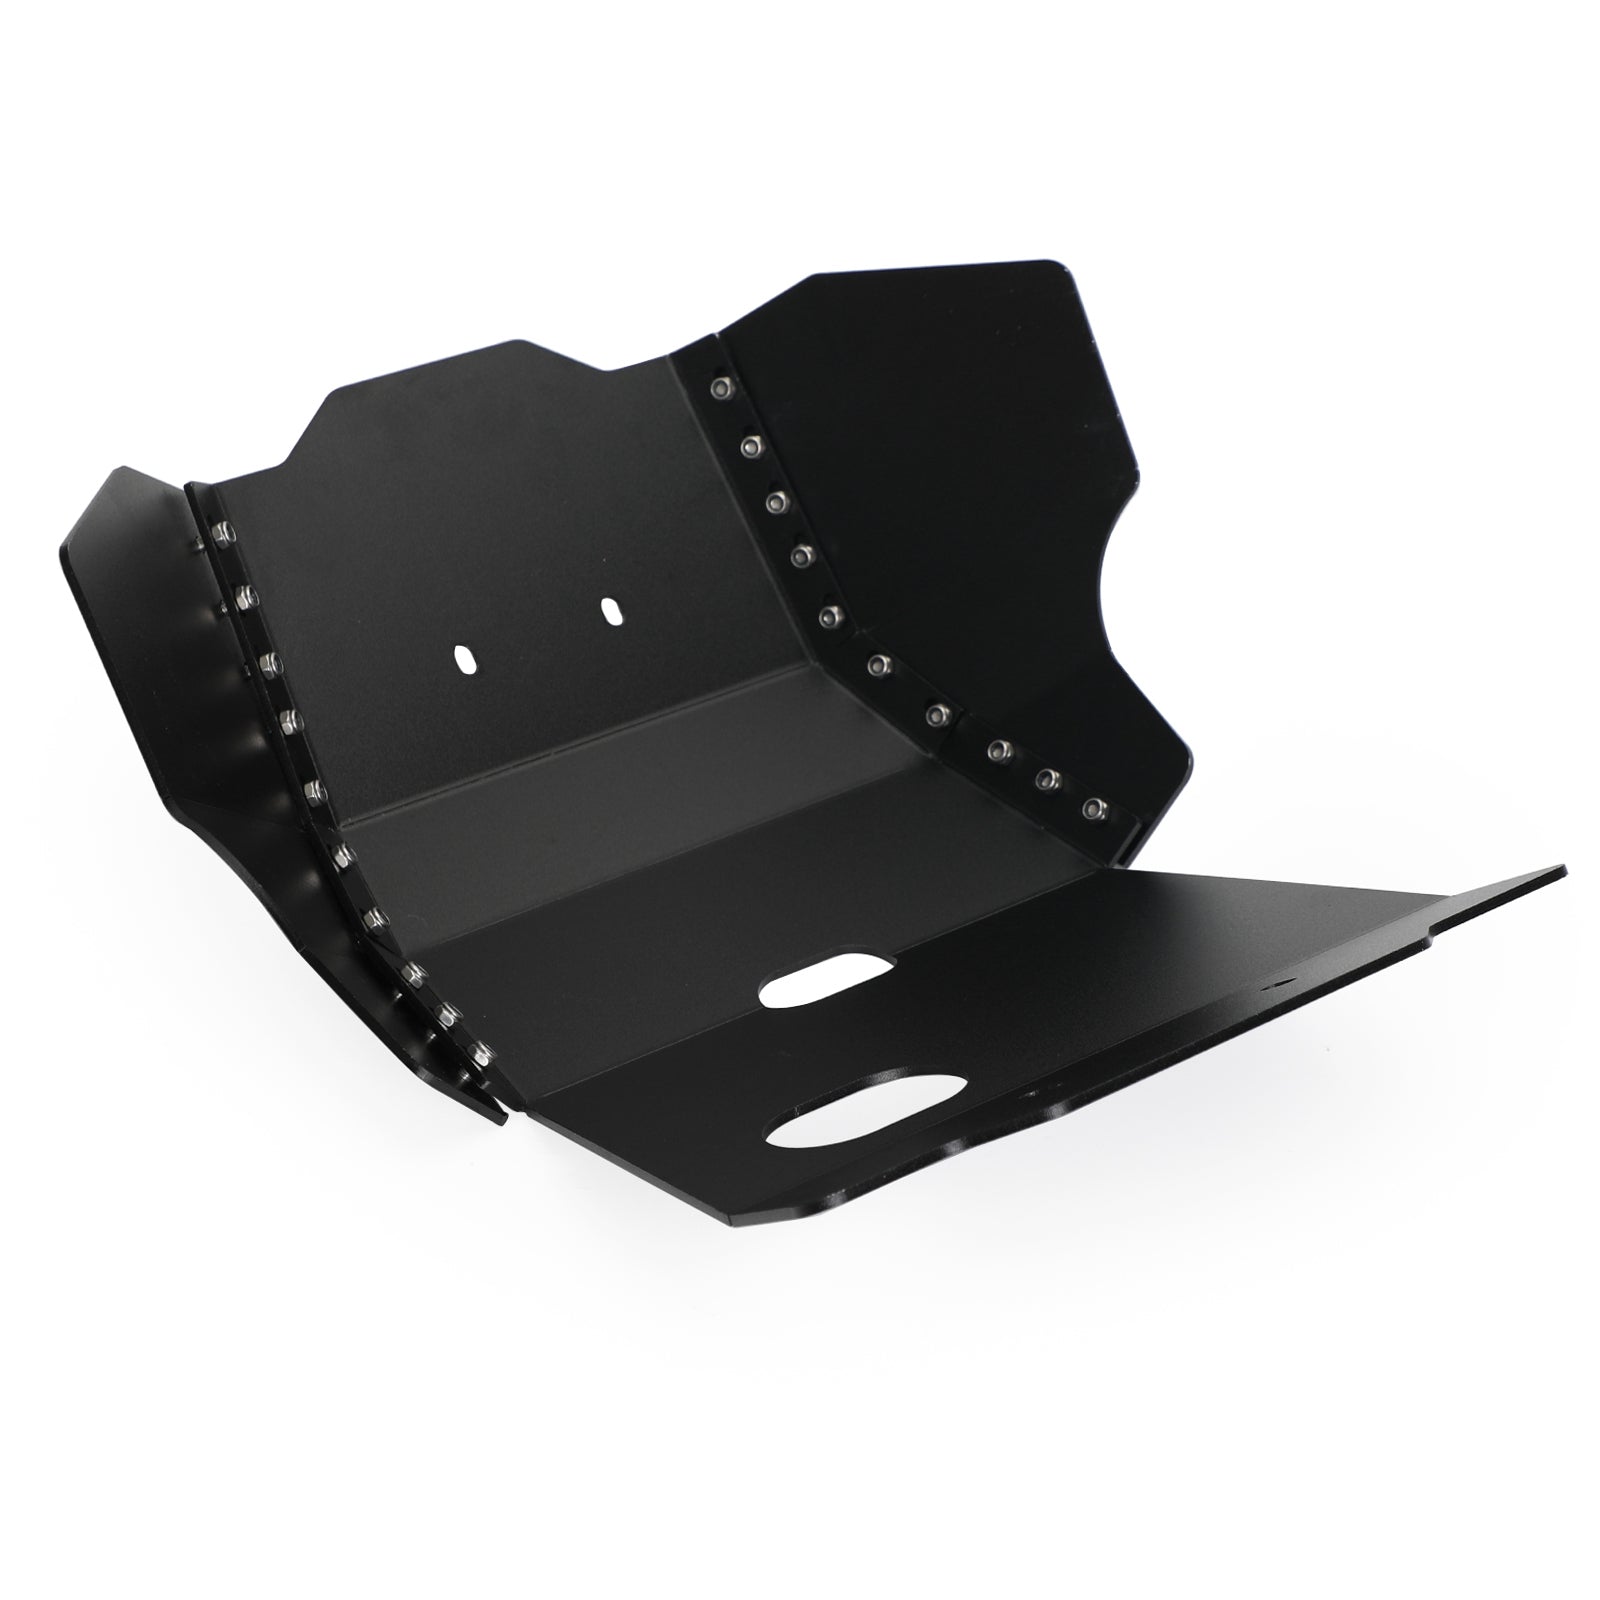 Engine Guard Skid Plate Chassis Black Fit for Honda CRF250L CRF300L 2021-2022 Generic